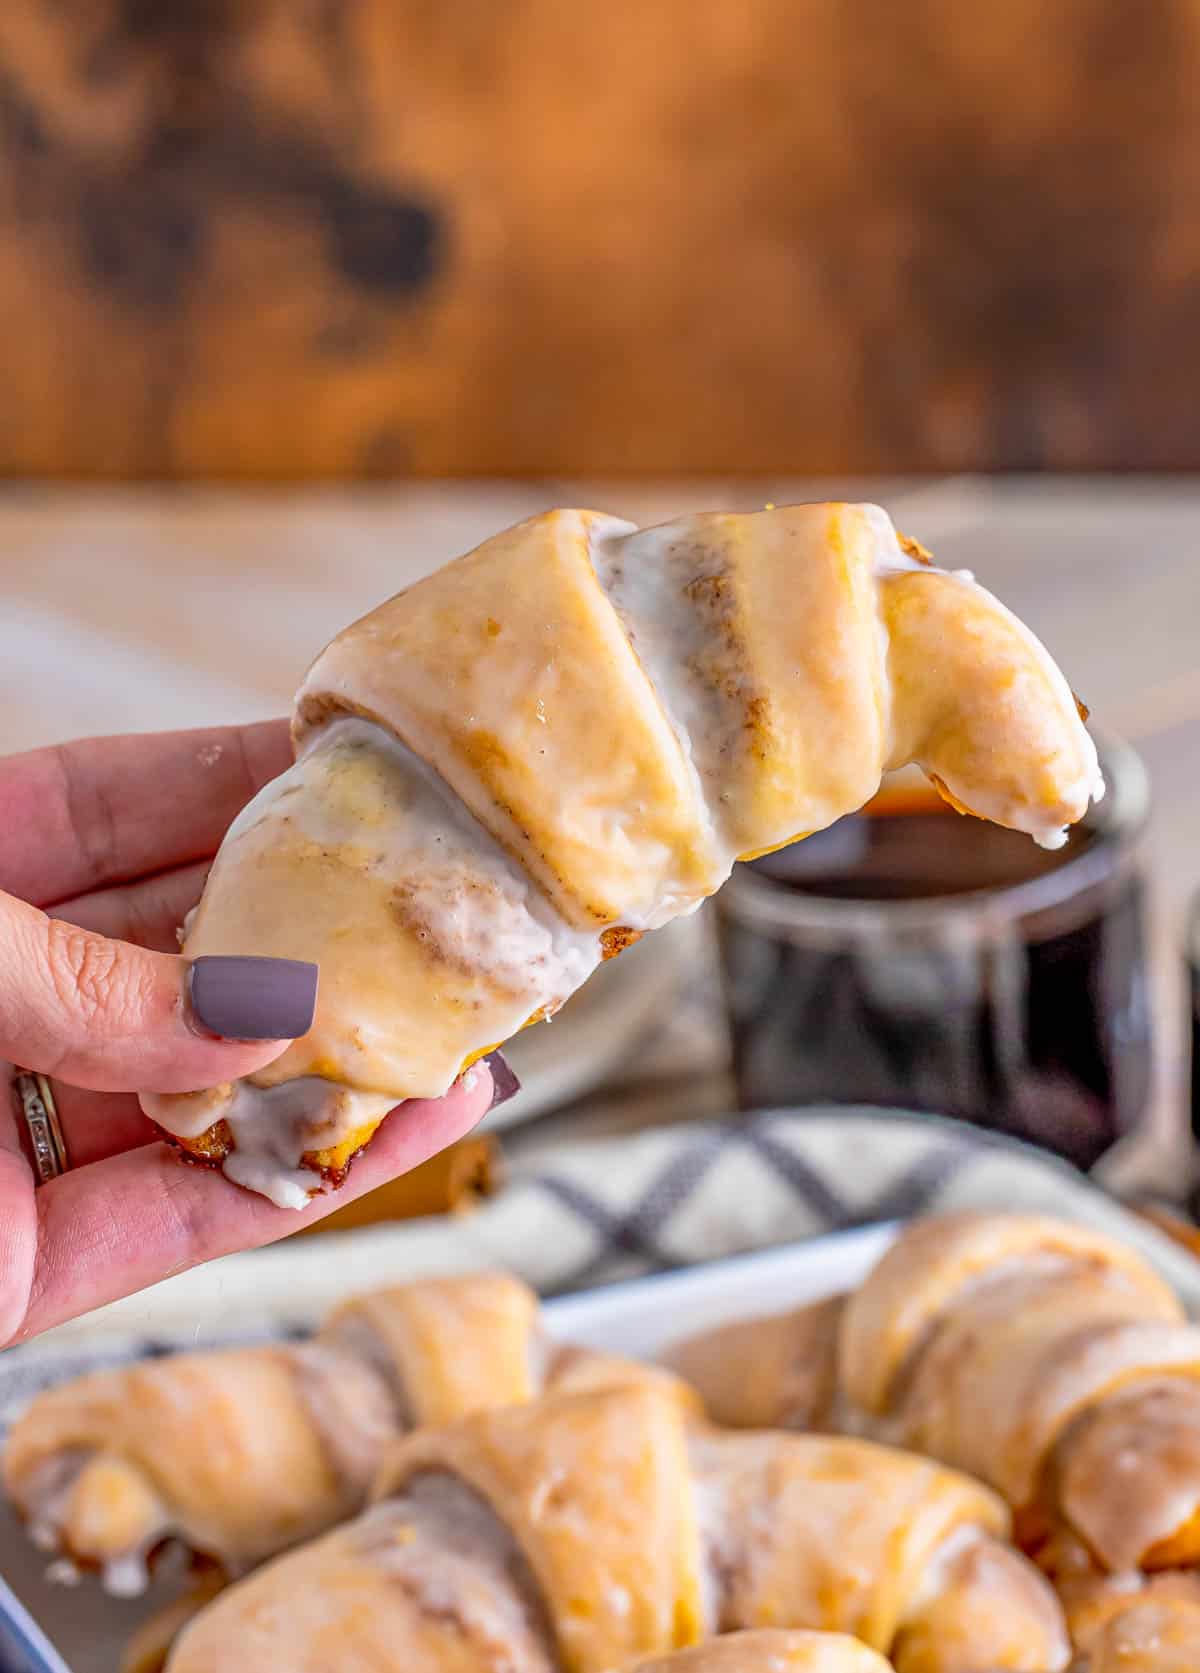 Hand holding up one of the Cinnamon Crescent Rolls.